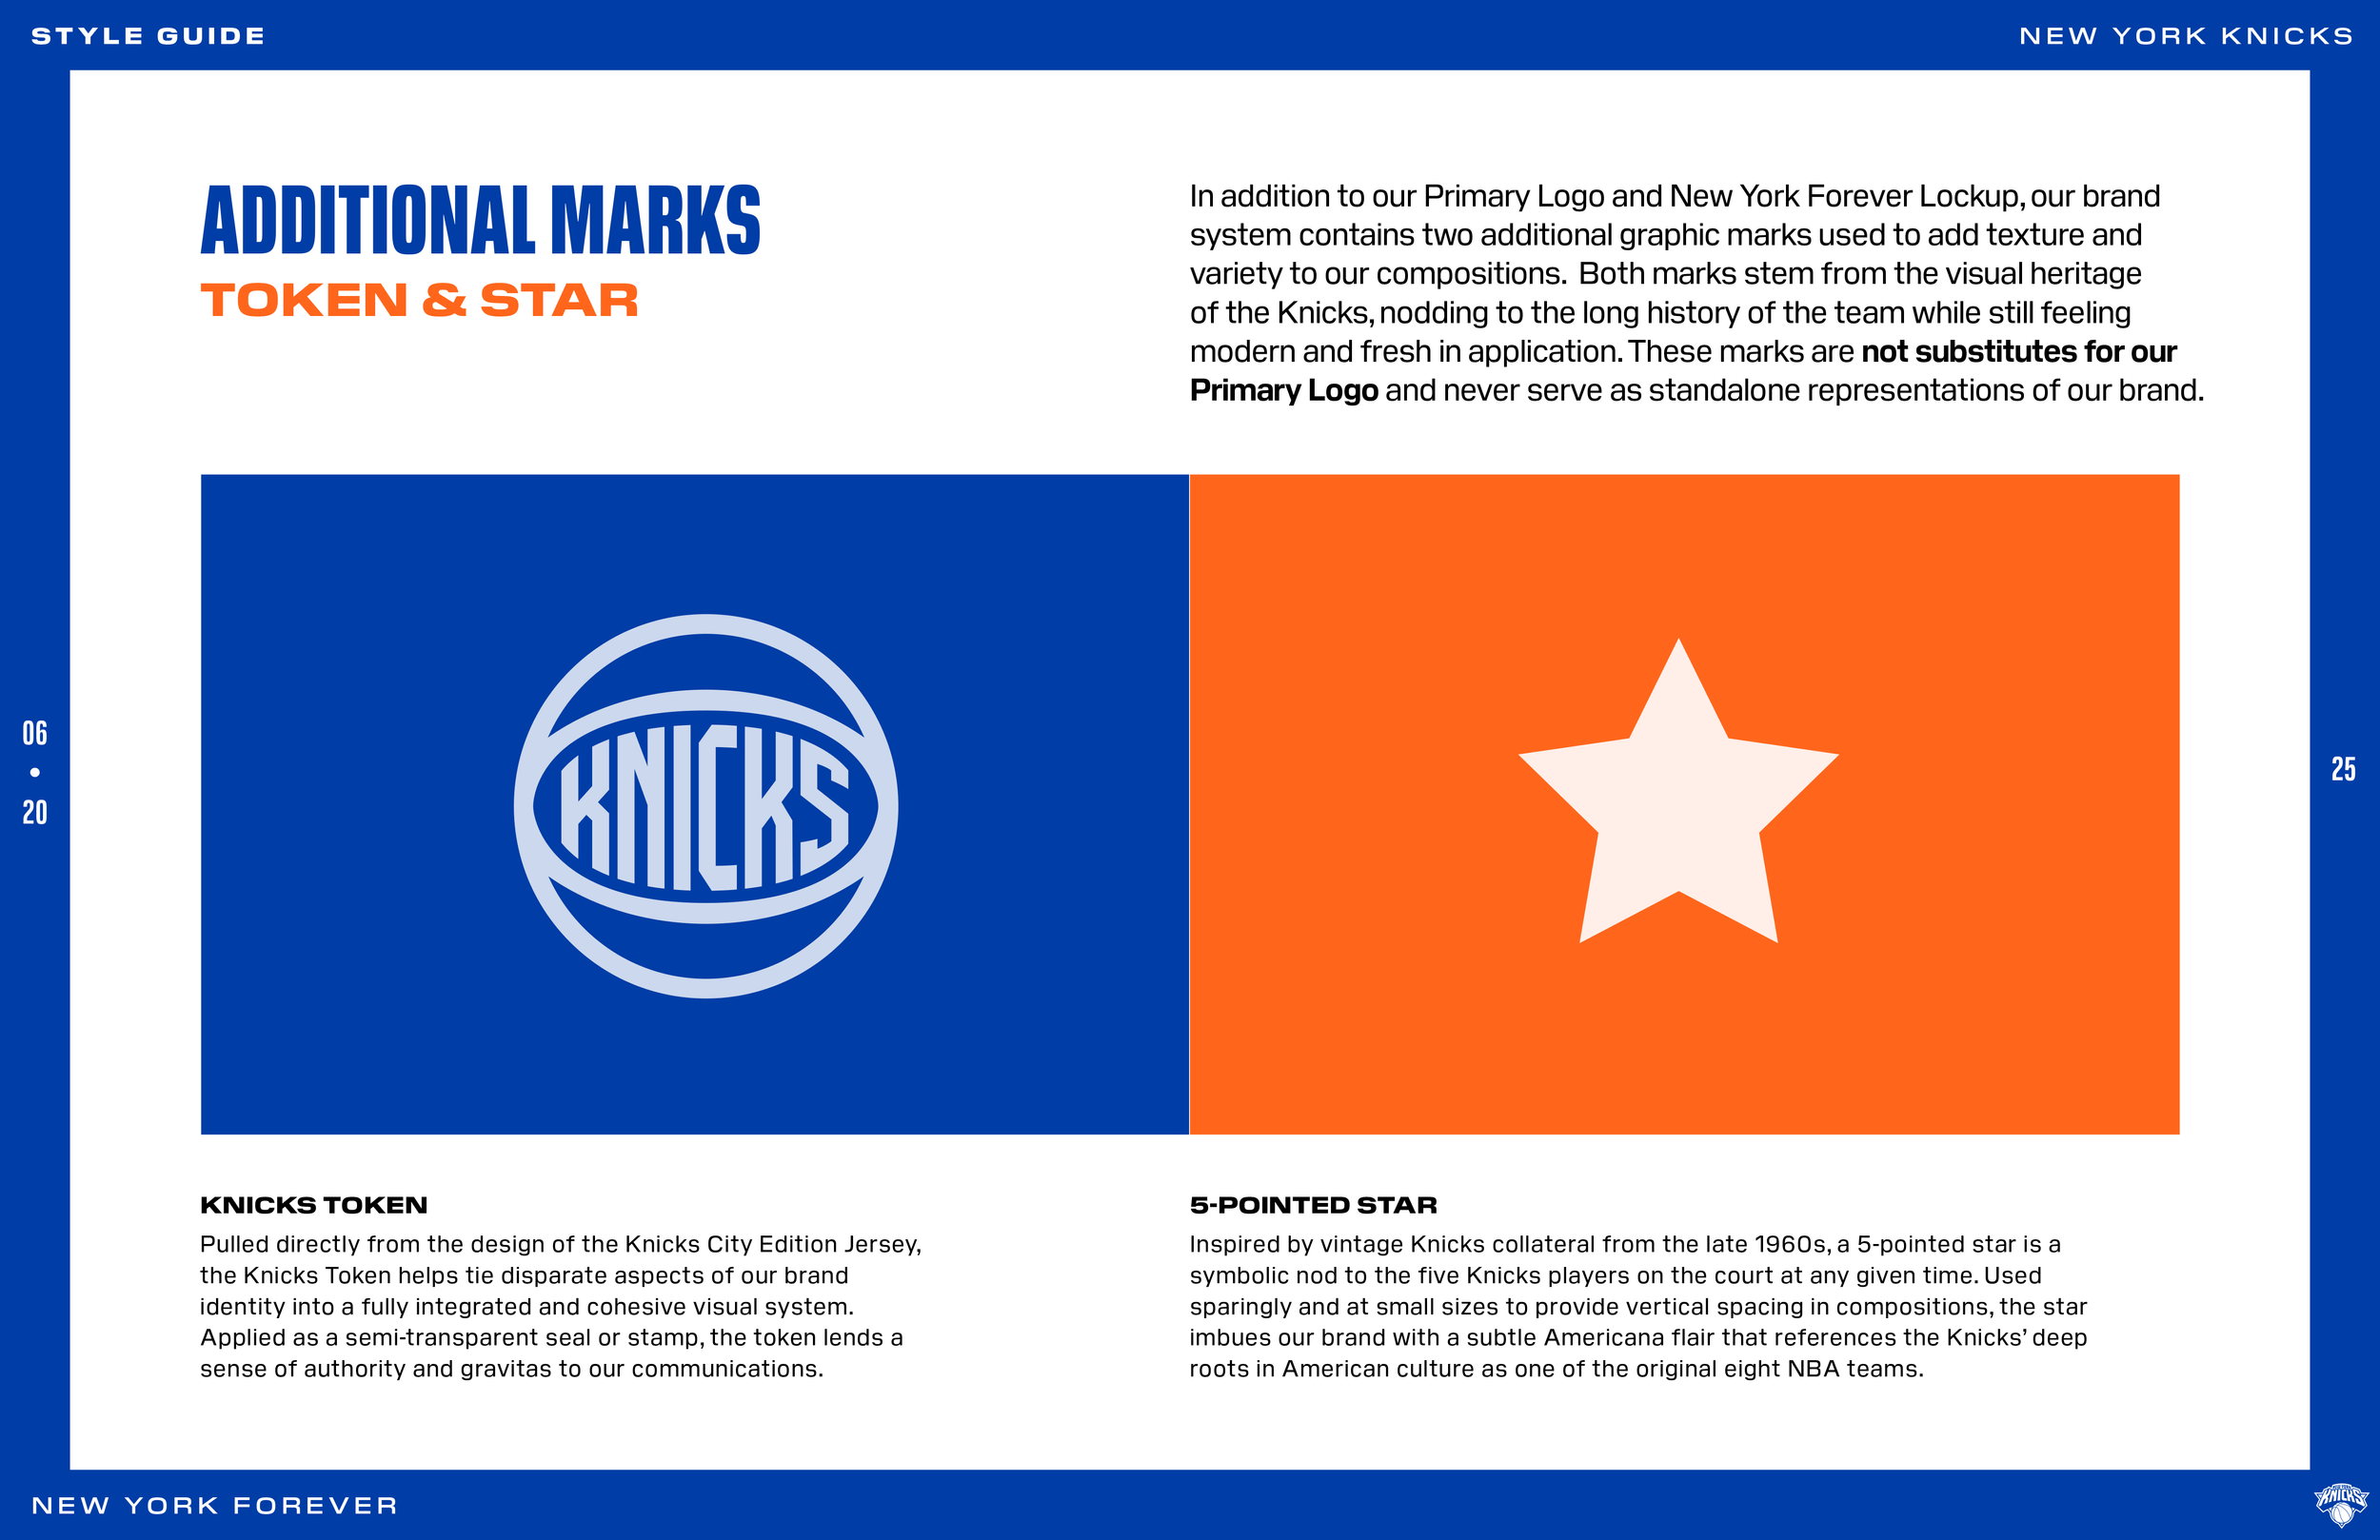 Pages from KNICKS_StyleGuide_062420 25.png